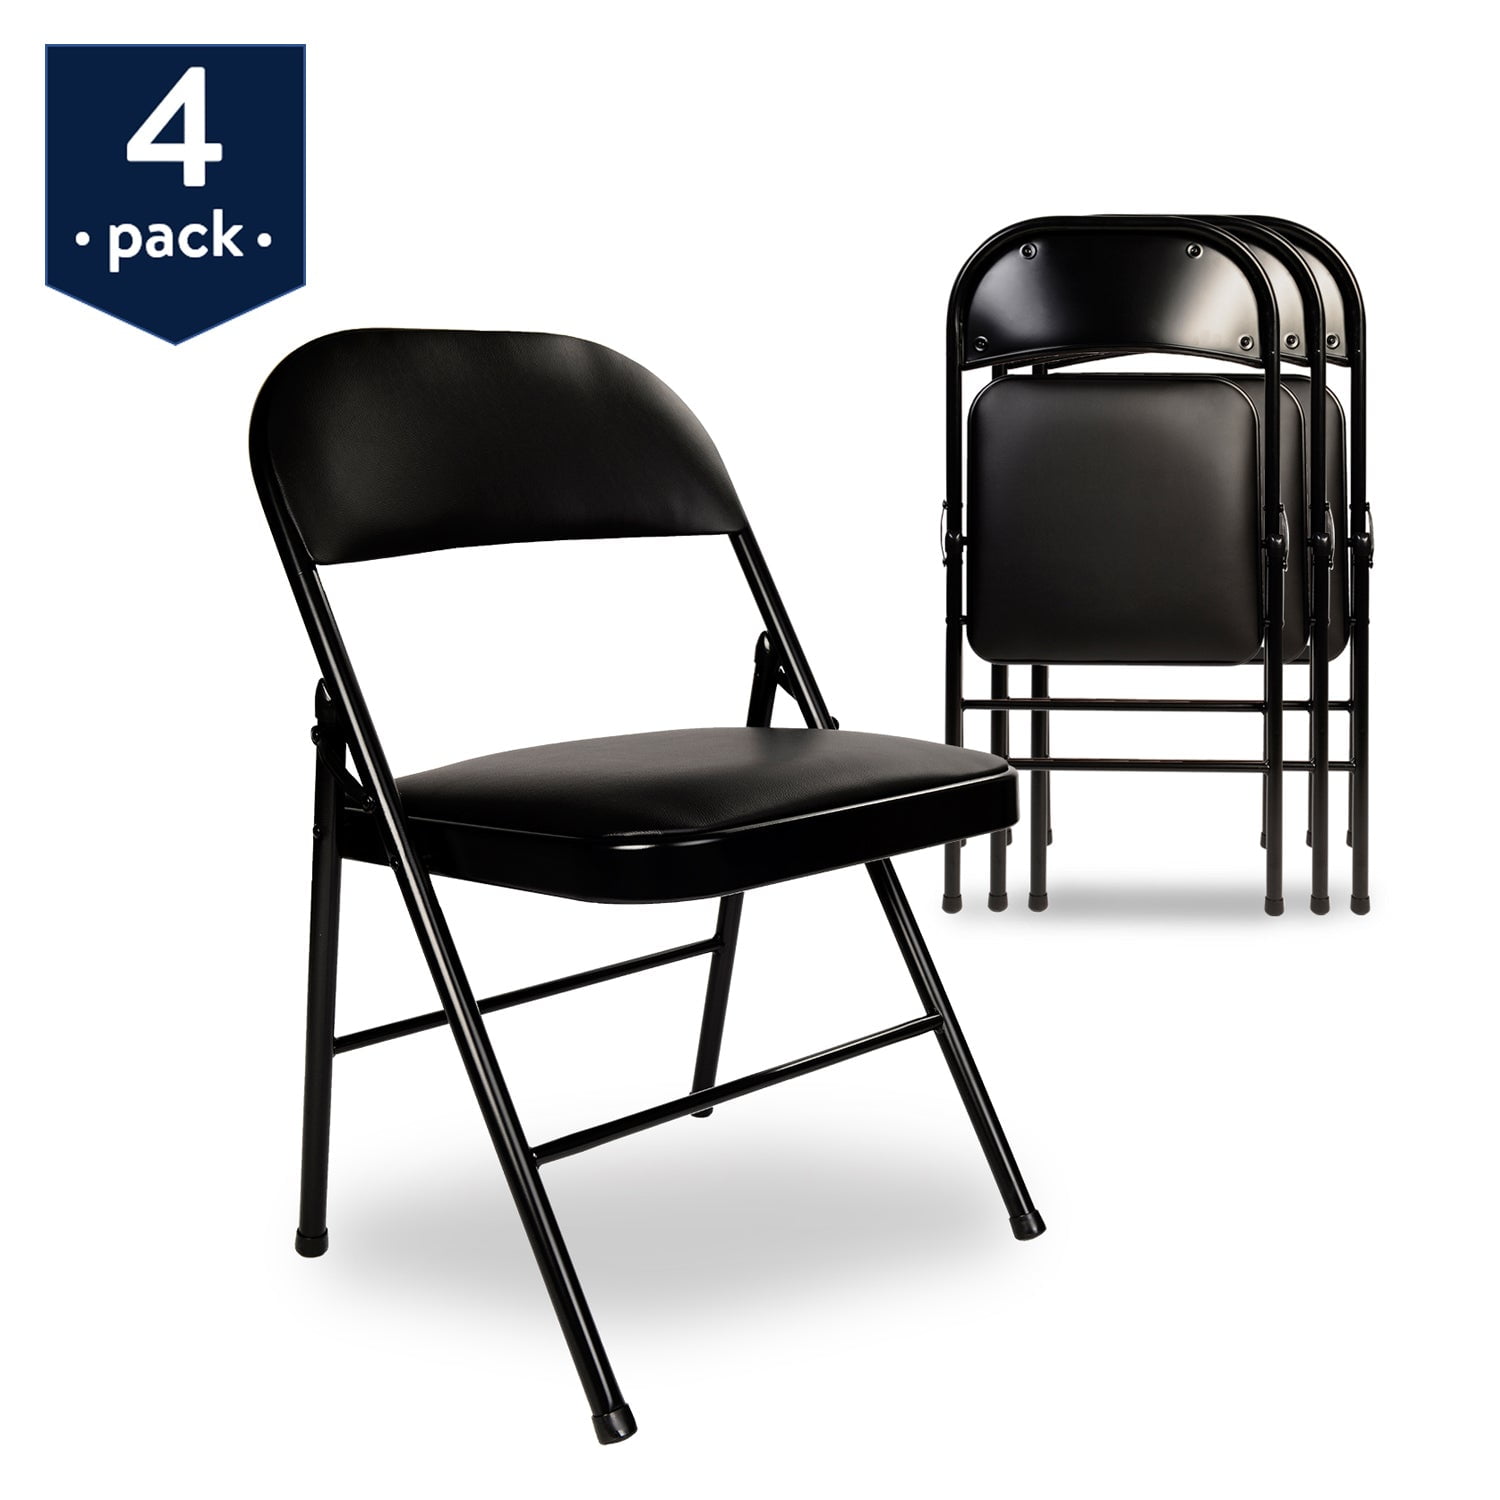 Chairs Studying Dining Office Event Chair Folding Padded FauxLeather Black White 